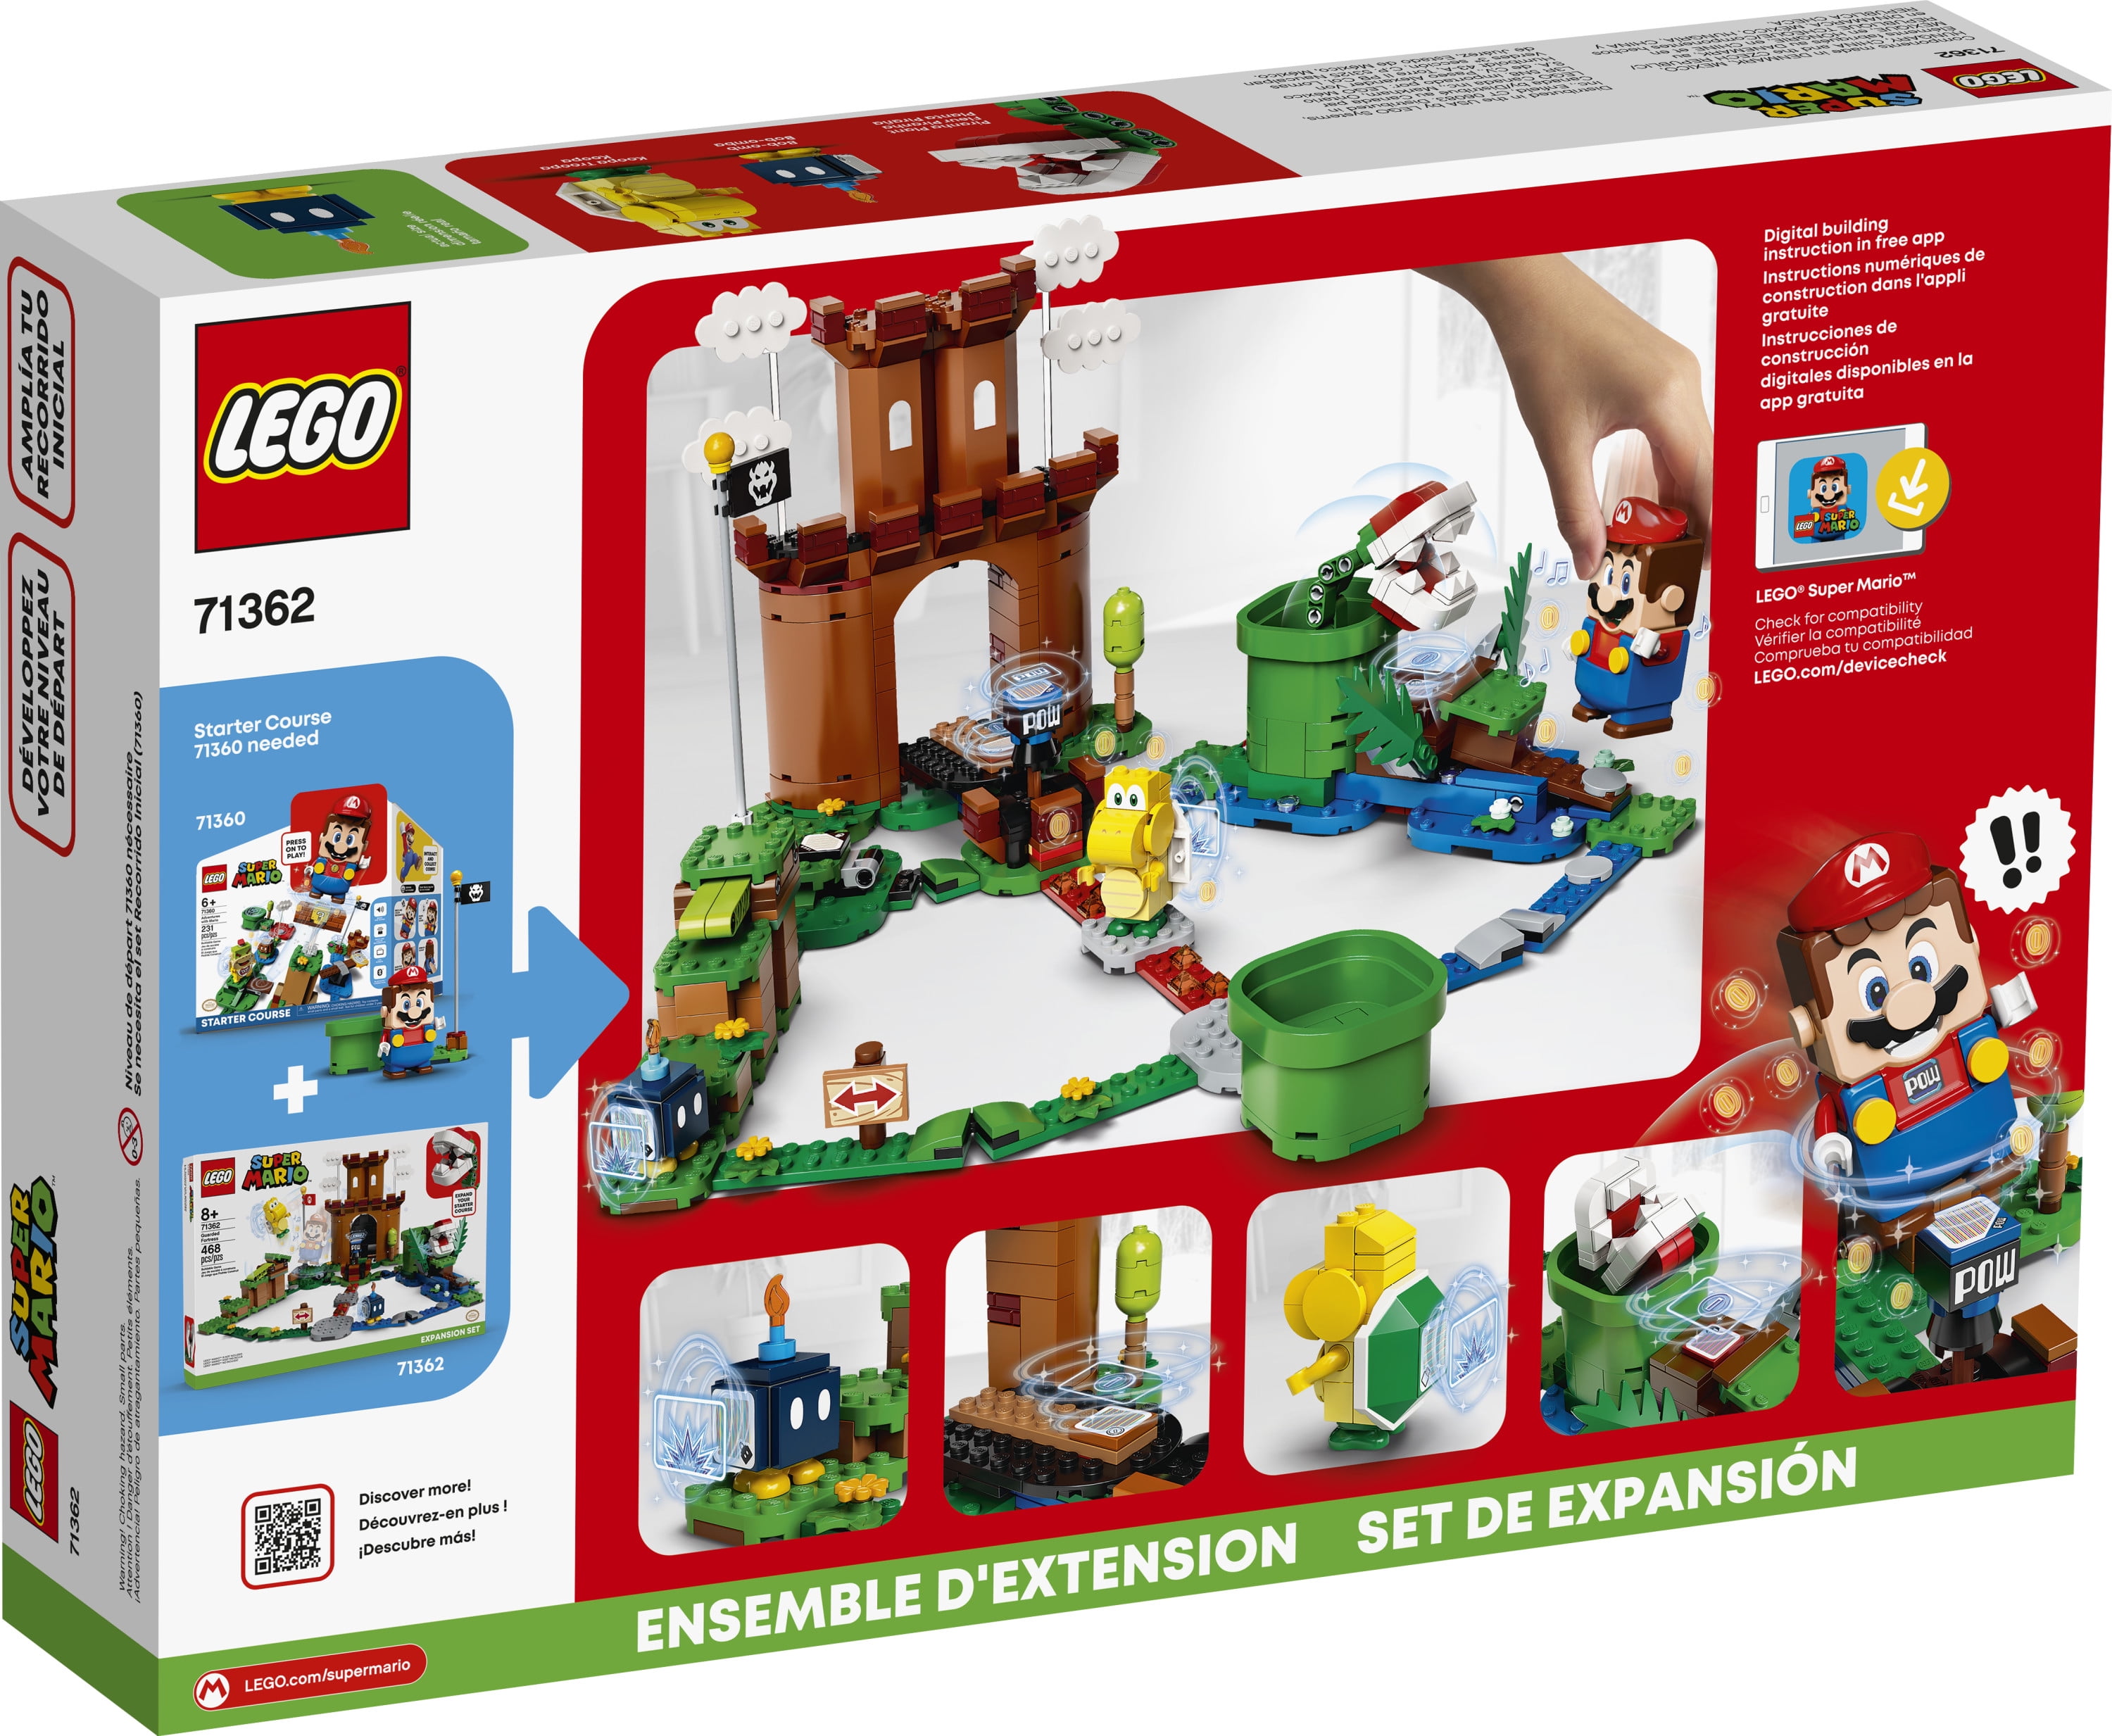 Details about   LEGO Super Mario Guarded Fortress Expansion Set 71362 Building Kit 